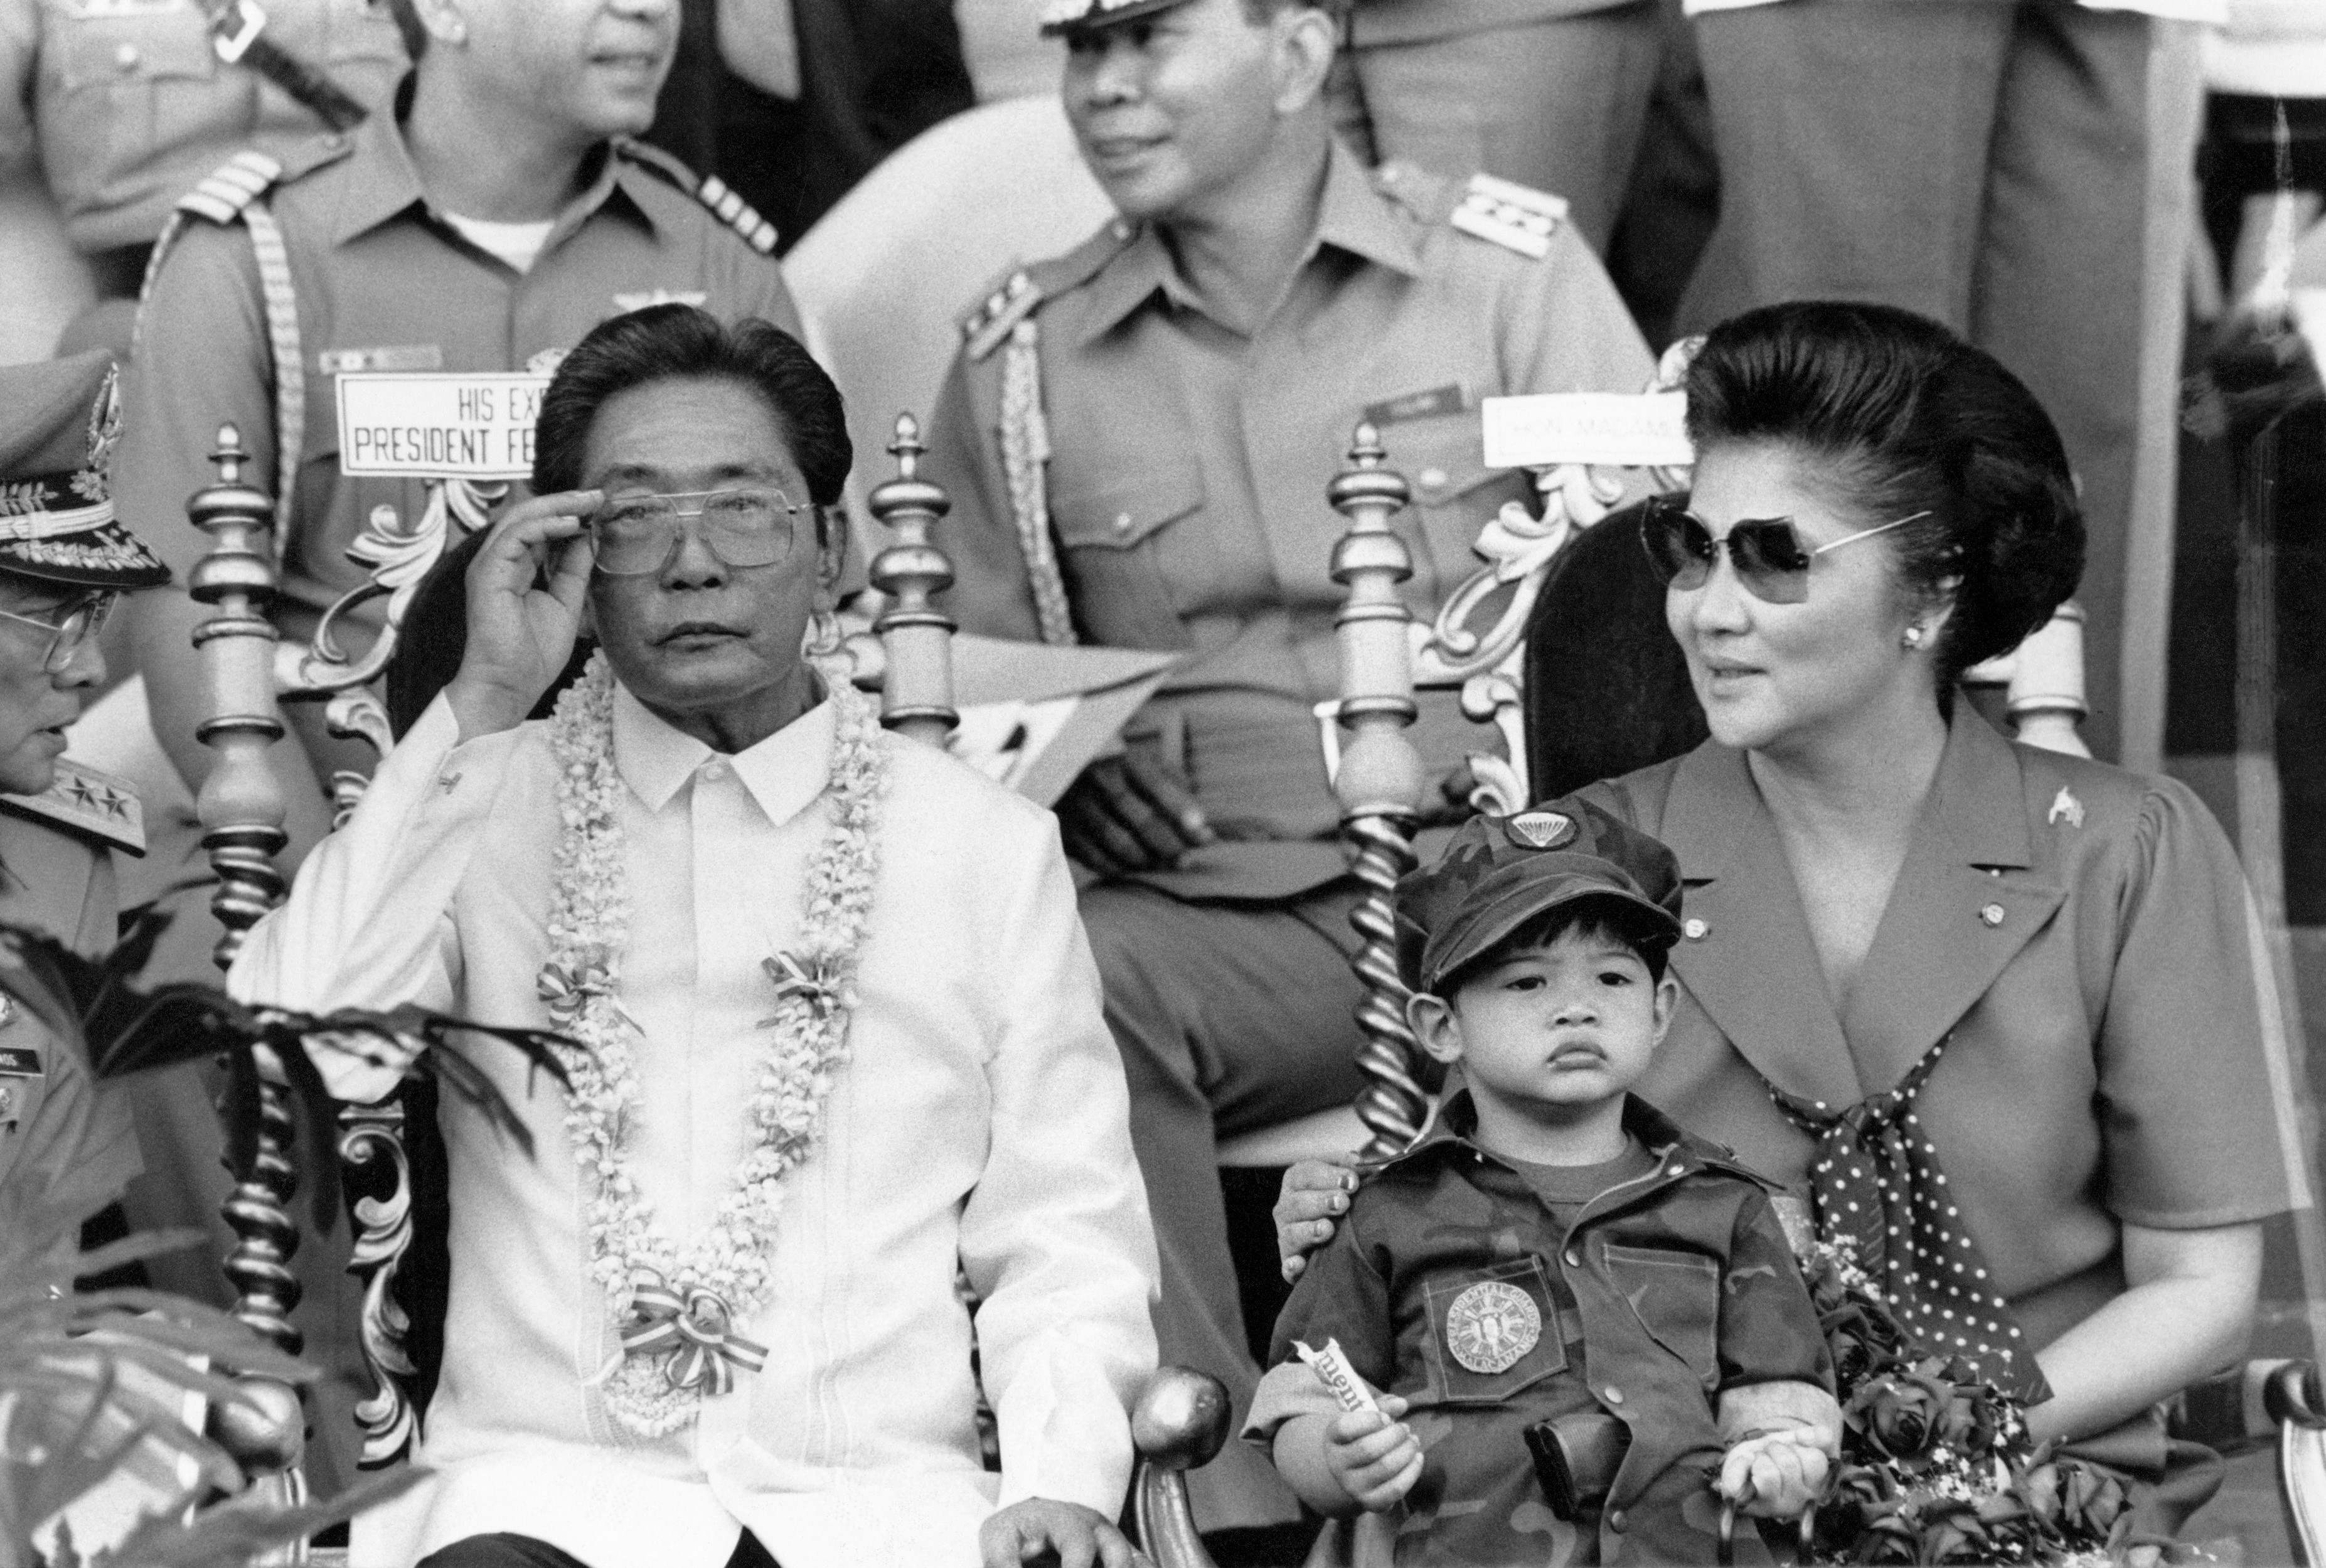 The Marcos family holds the distinction of being in the ‘Guinness Book of World Records’ for having carried off the largest-ever theft from a government